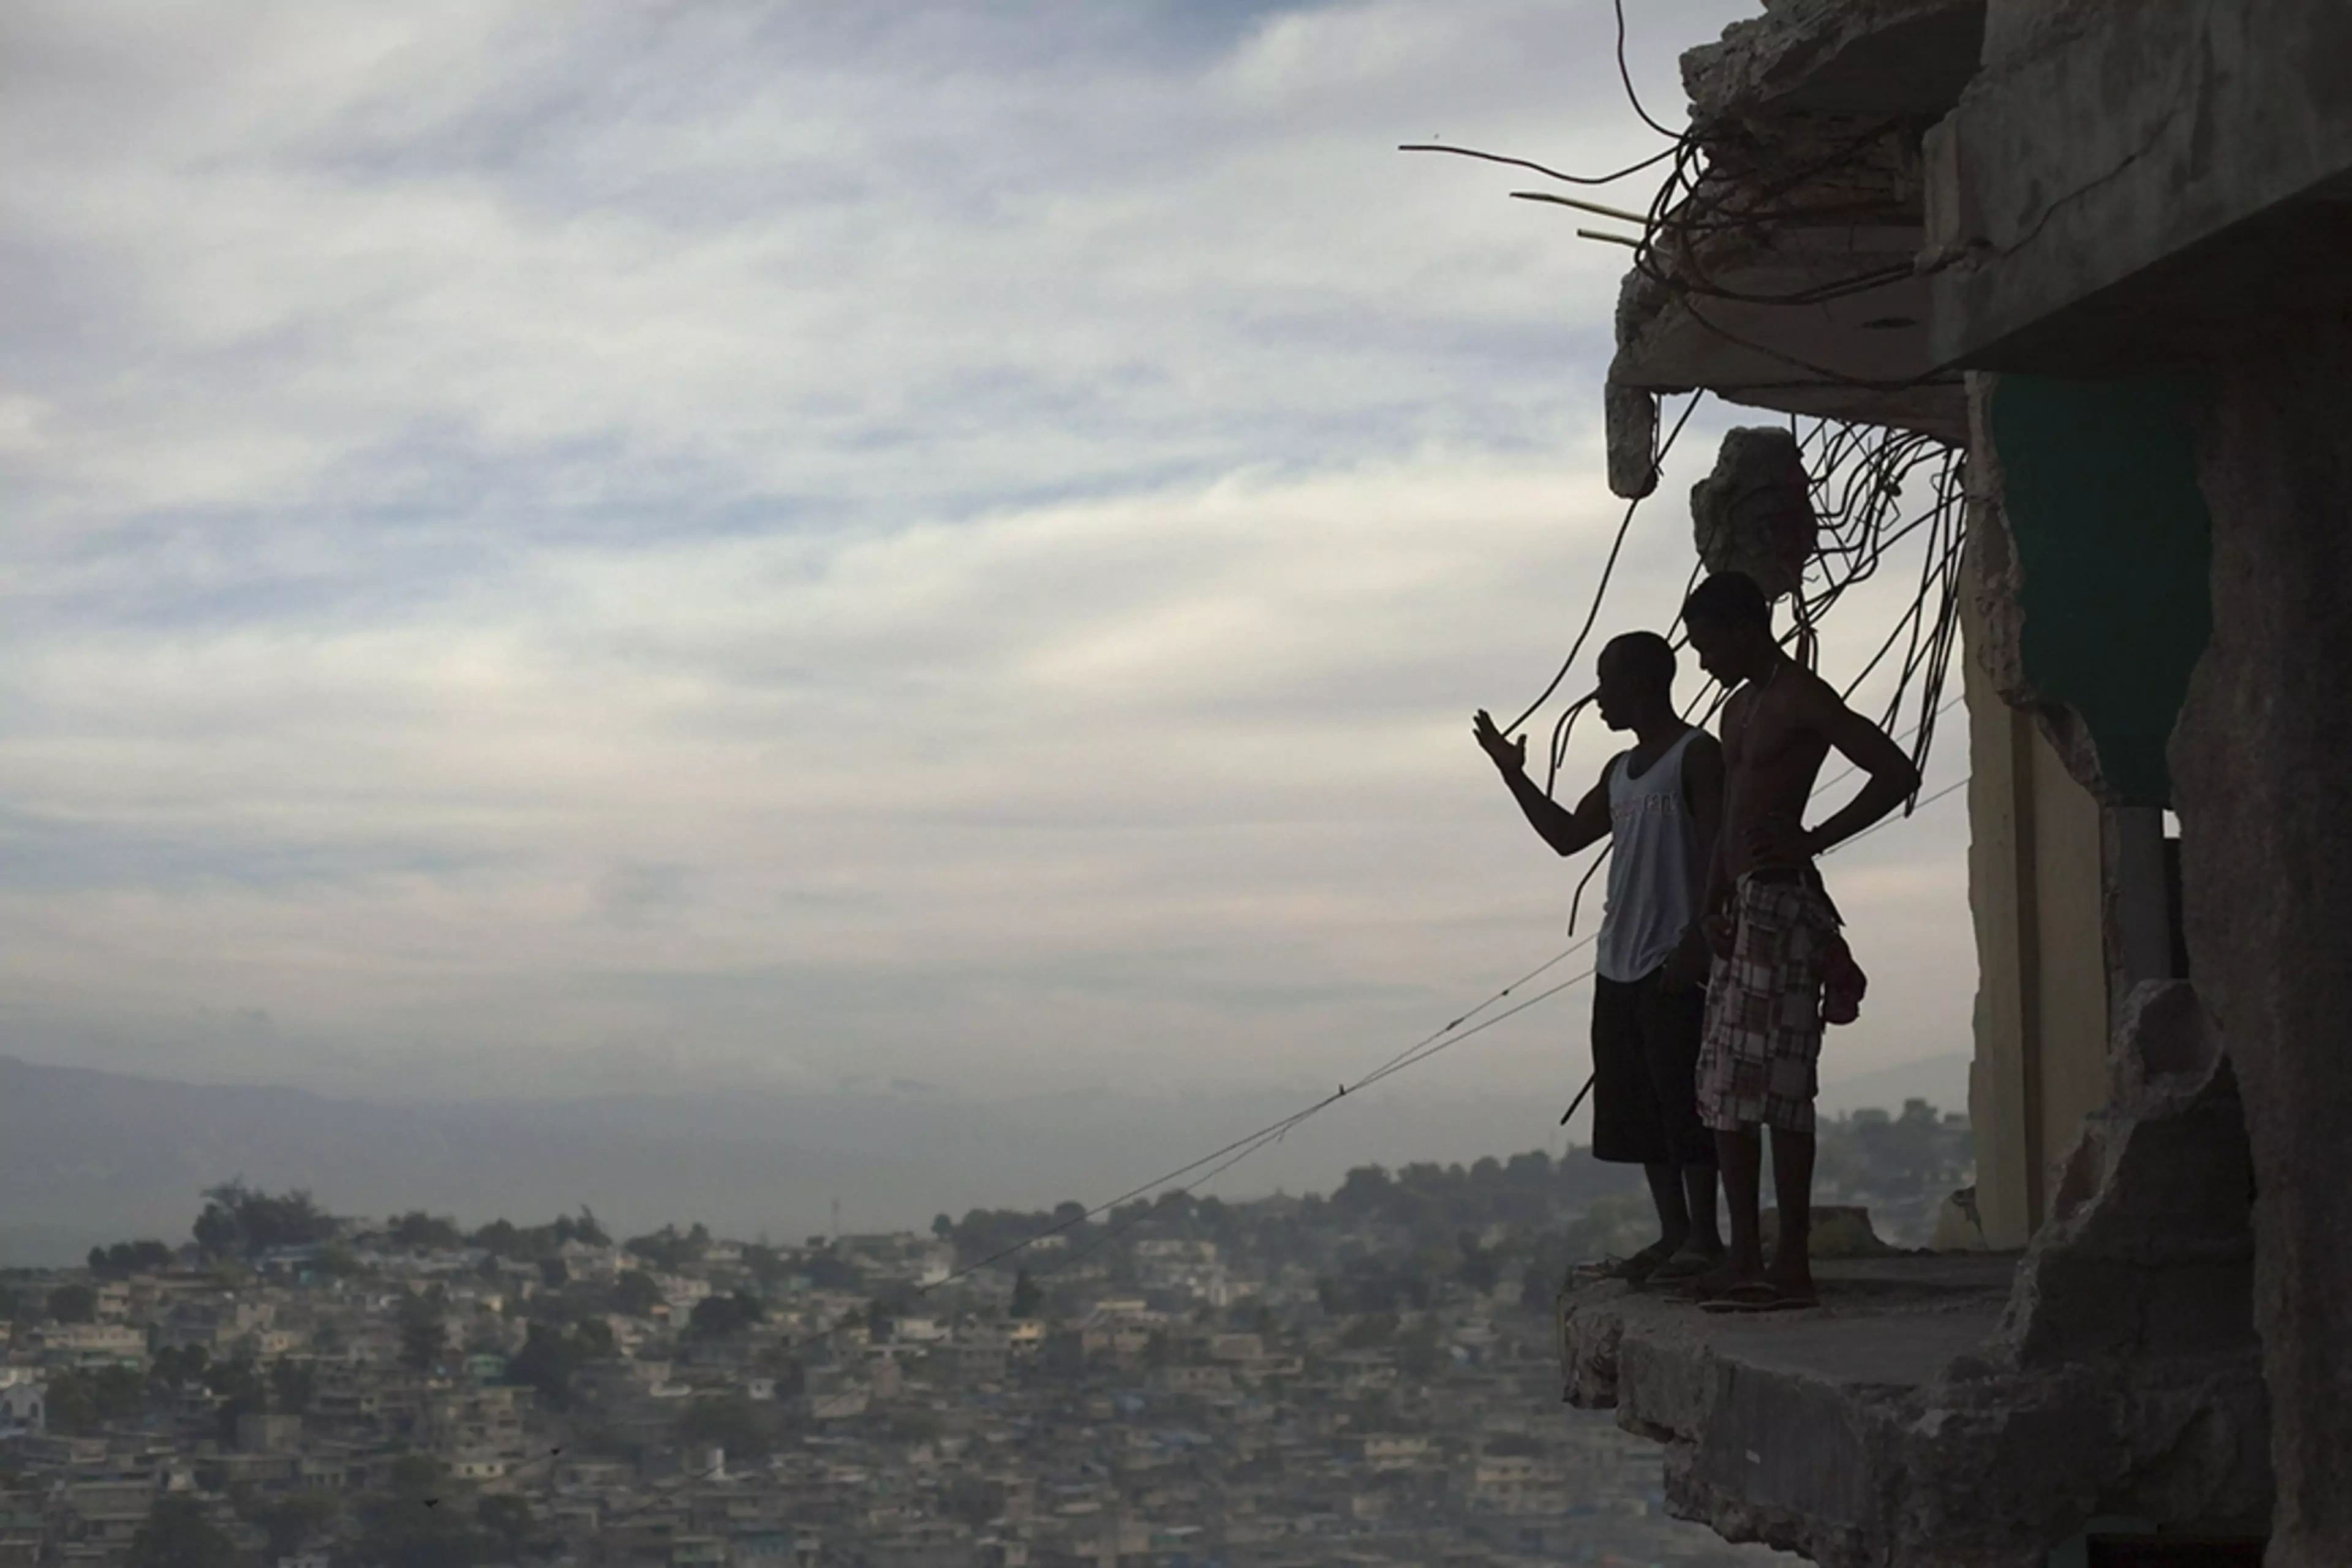 Two men overlook Port-au-Prince in the wake of the 7.0-magnitude earthquake of 2010.